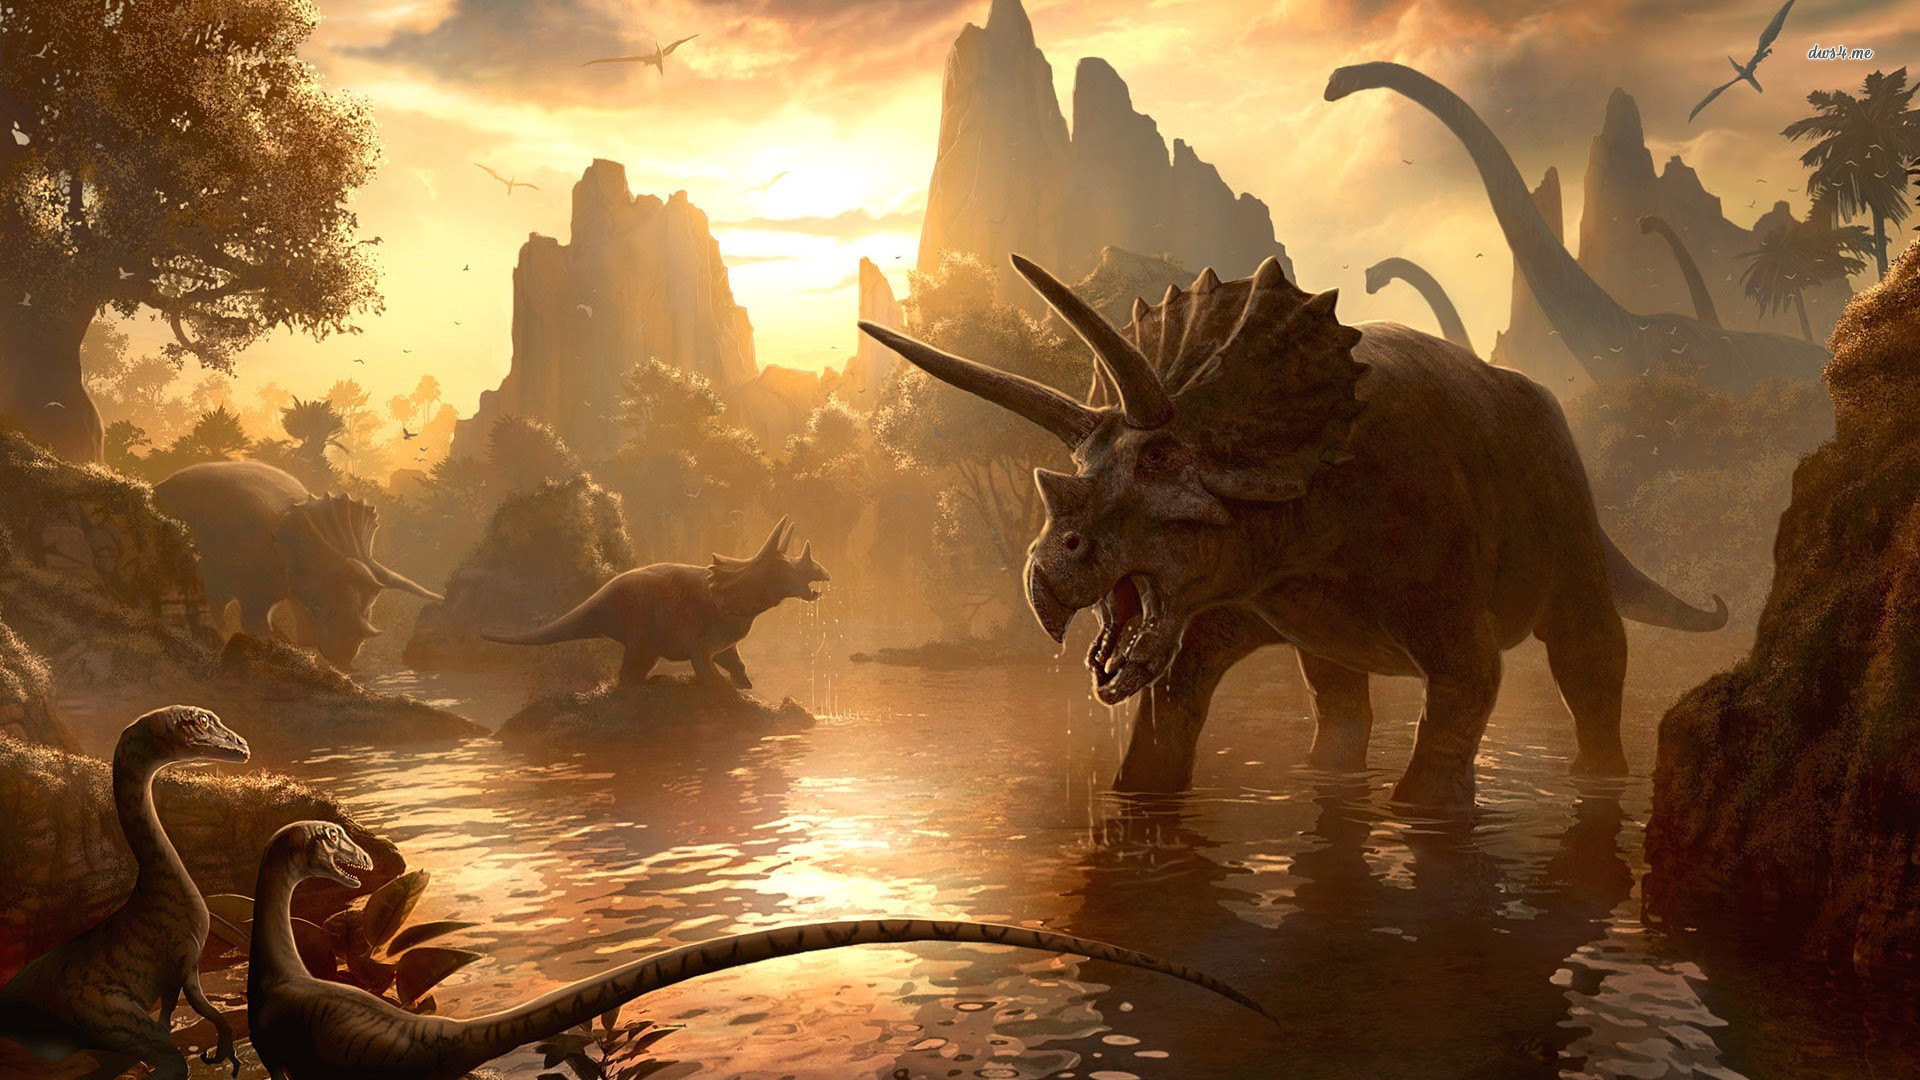 1920x1080 Dinosours are creatures who lived on the eath 65 million years ago. The  name '